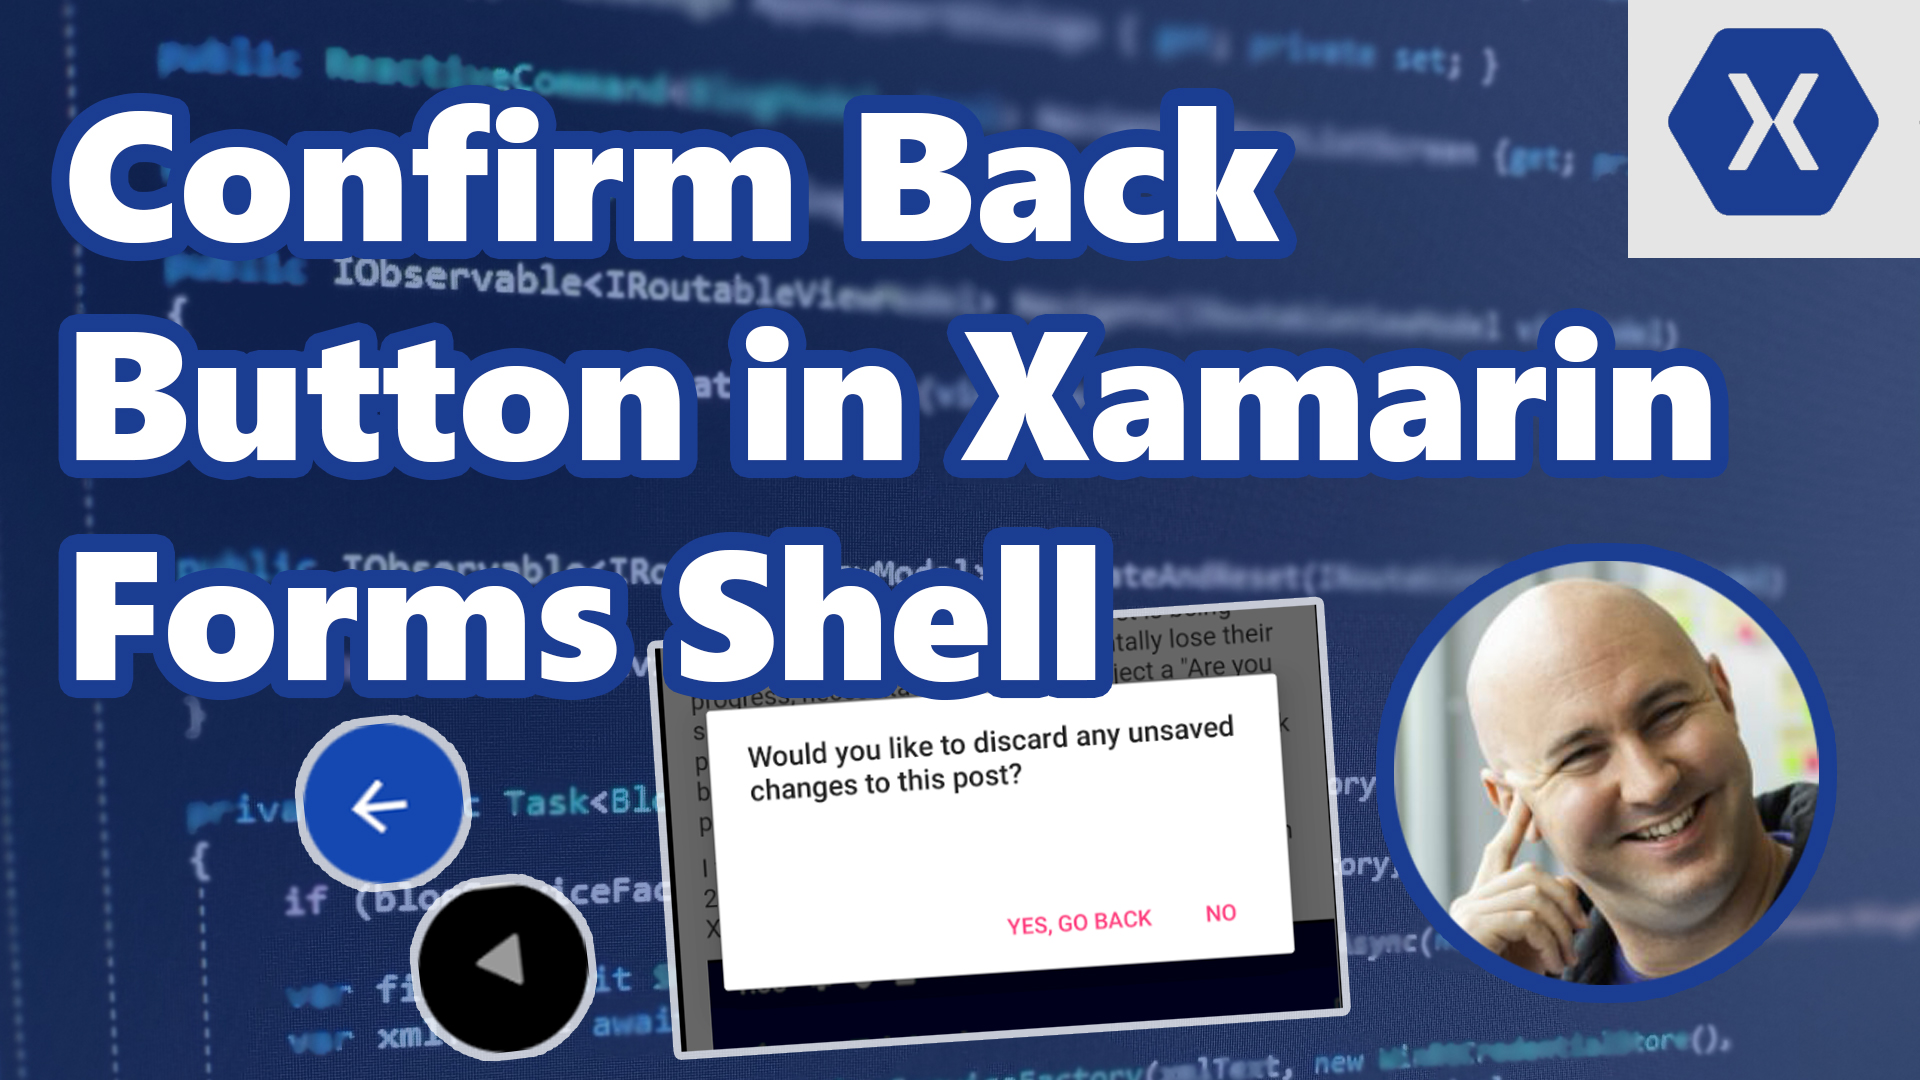 image from Handling and intercepting Back button Navigation in Xamarin Forms Shell